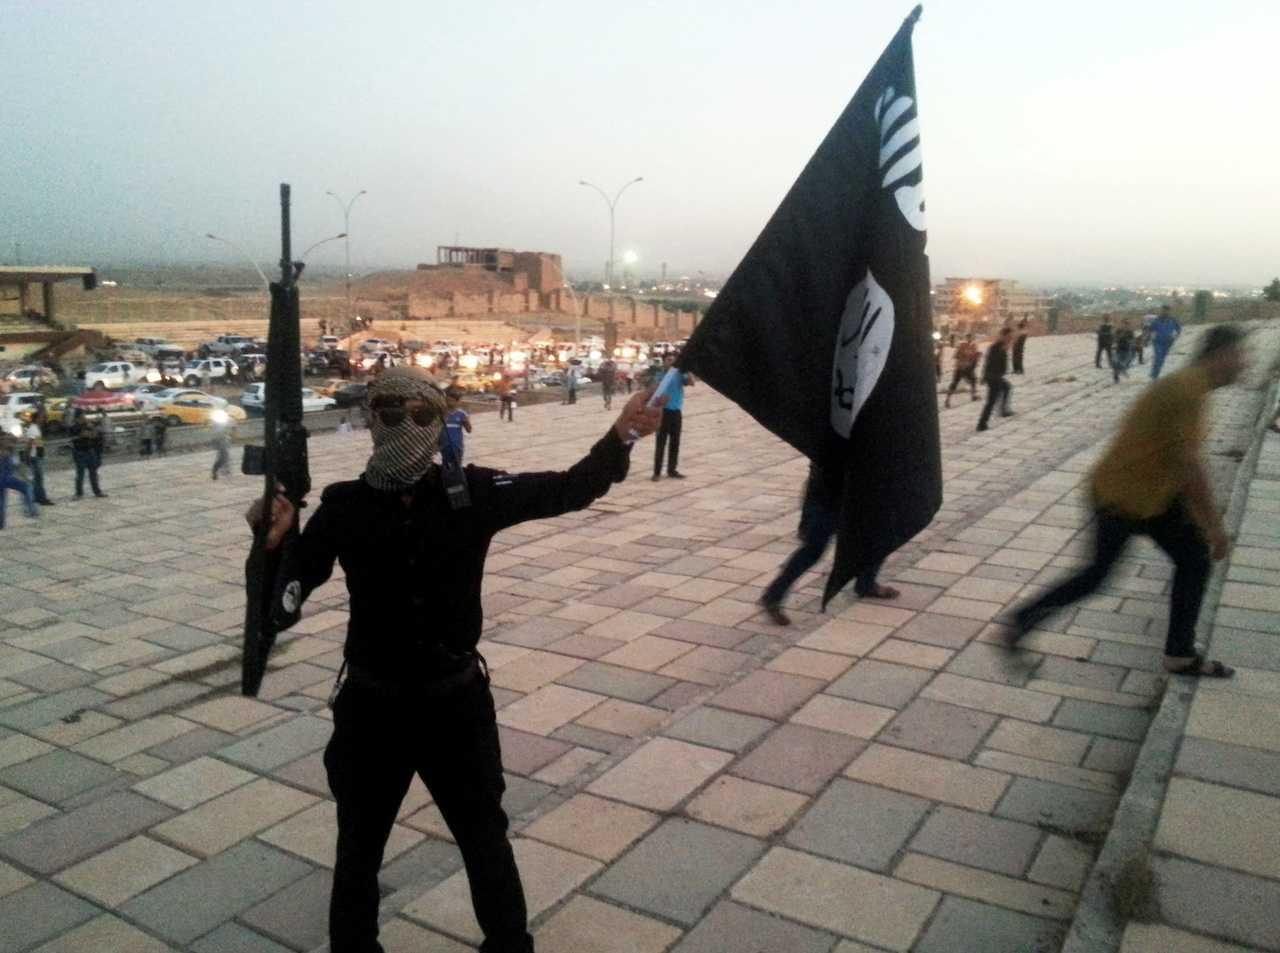 An Islamic State fighter holds a flag and a weapon on a street in the city of Mosul, June 23, 2014. Photo: Reuters